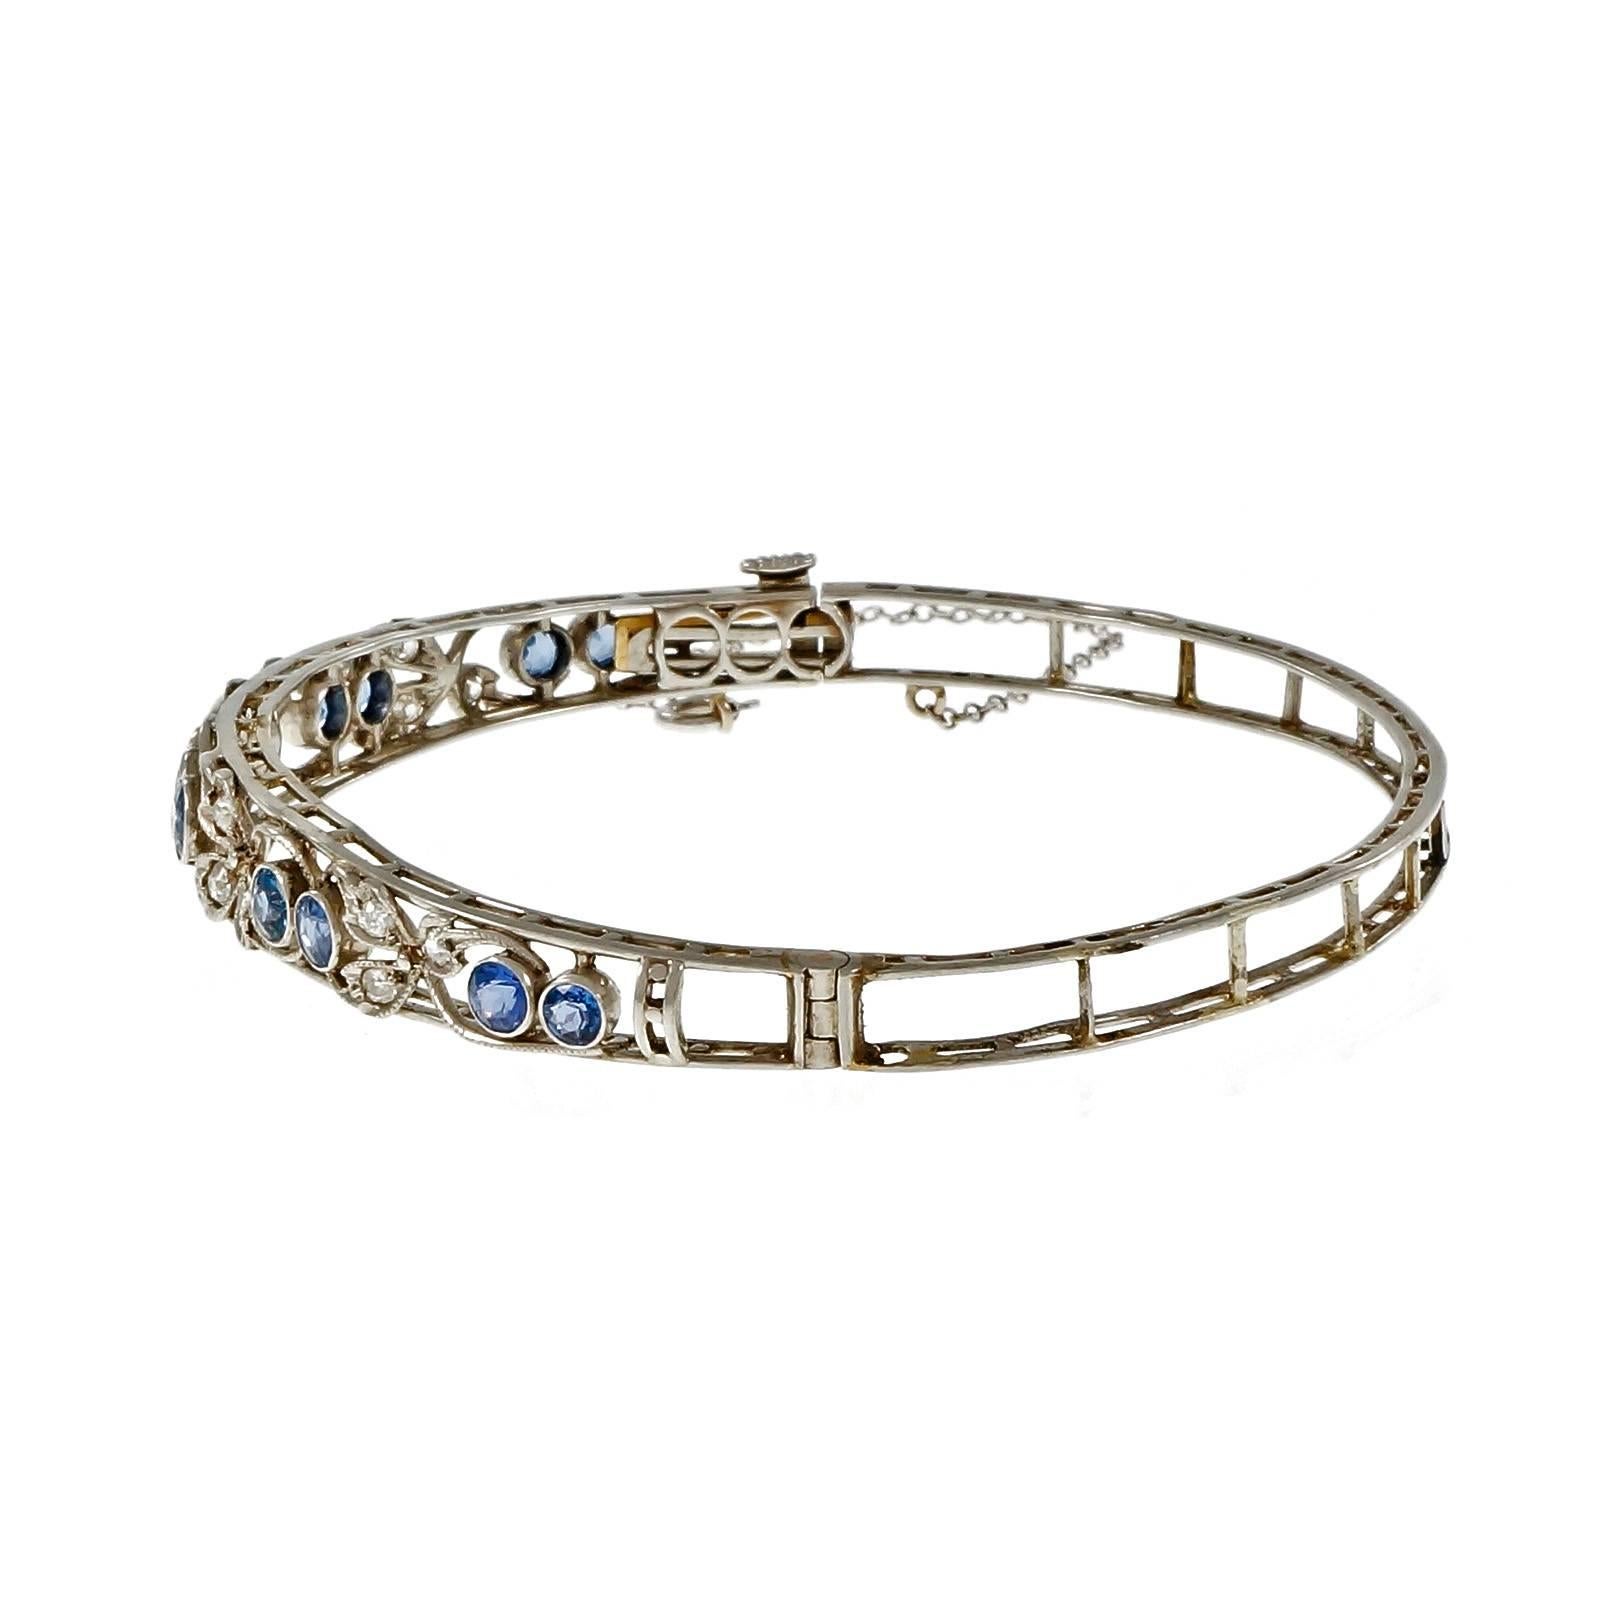 Early 1900’s Edwardian bangle bracelet handmade in Platinum with natural GIA certificate # certified no heat Montana Sapphires with diamond accents. Circa 1900s.

10 round bright blue Montana Sapphires, approx. total weight 2.50cts, VS – SI, 3.19